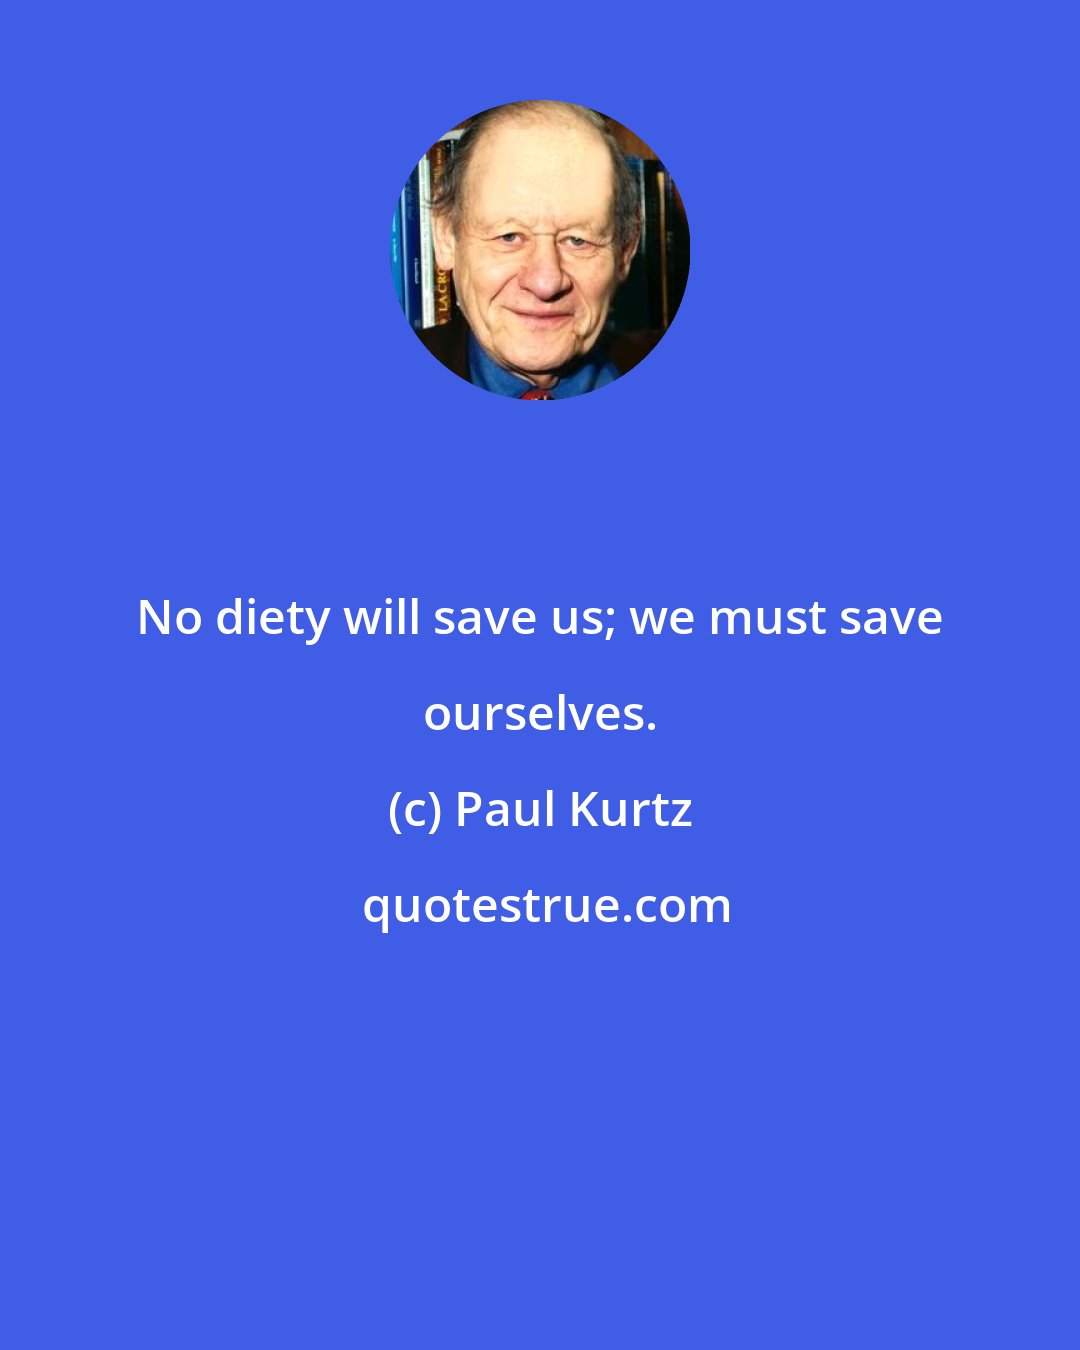 Paul Kurtz: No diety will save us; we must save ourselves.